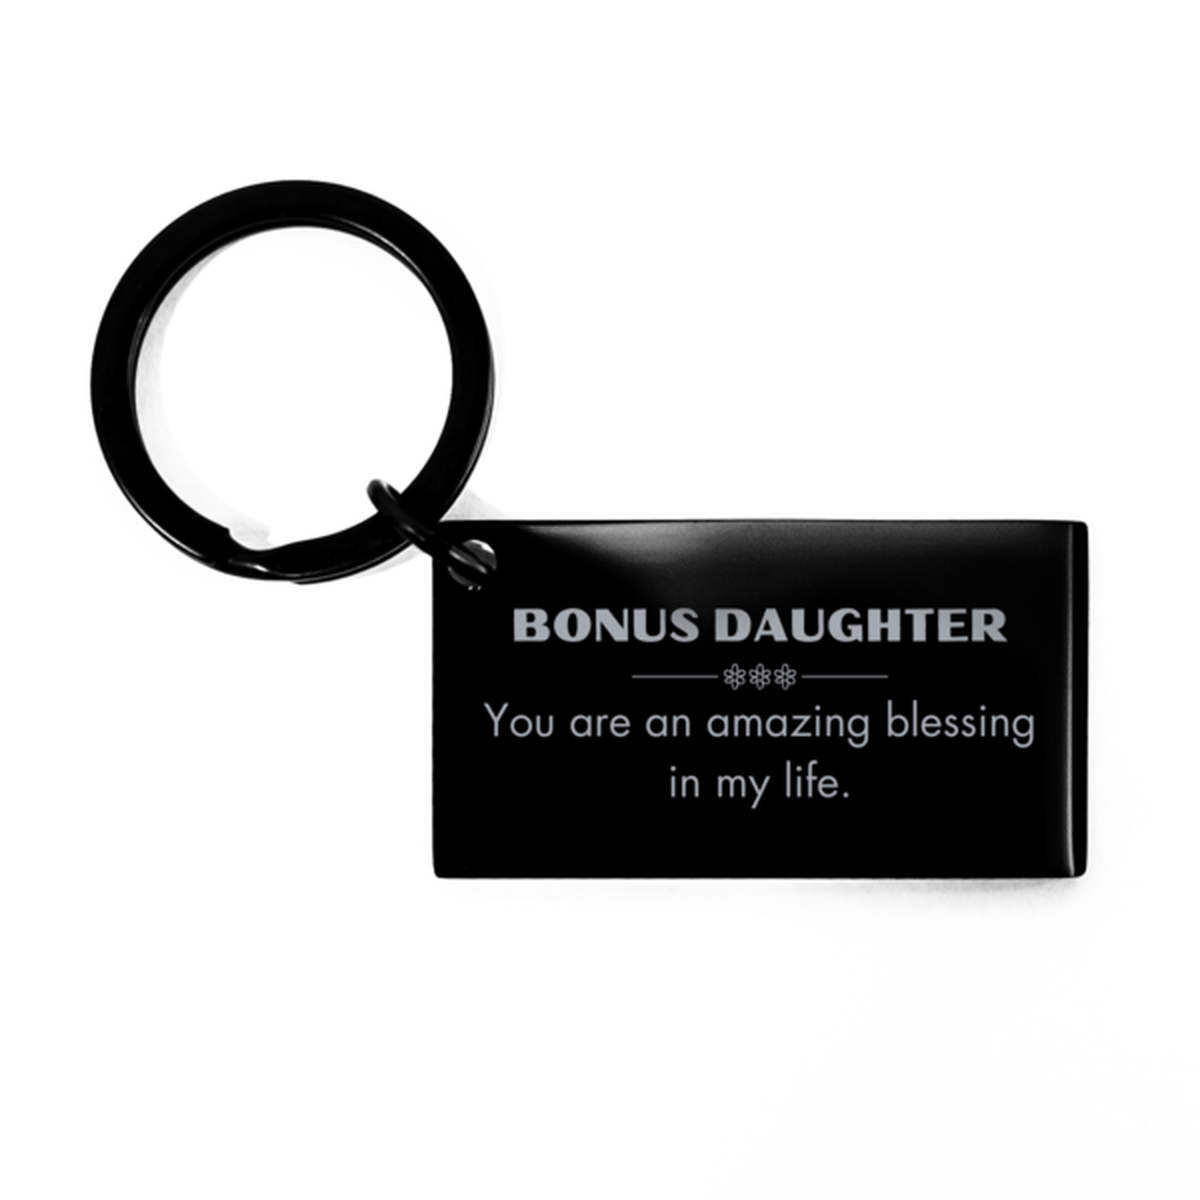 Bonus Daughter Keychain, You are an amazing blessing in my life, Thank You Gifts For Bonus Daughter, Inspirational Birthday Christmas Unique Gifts For Bonus Daughter